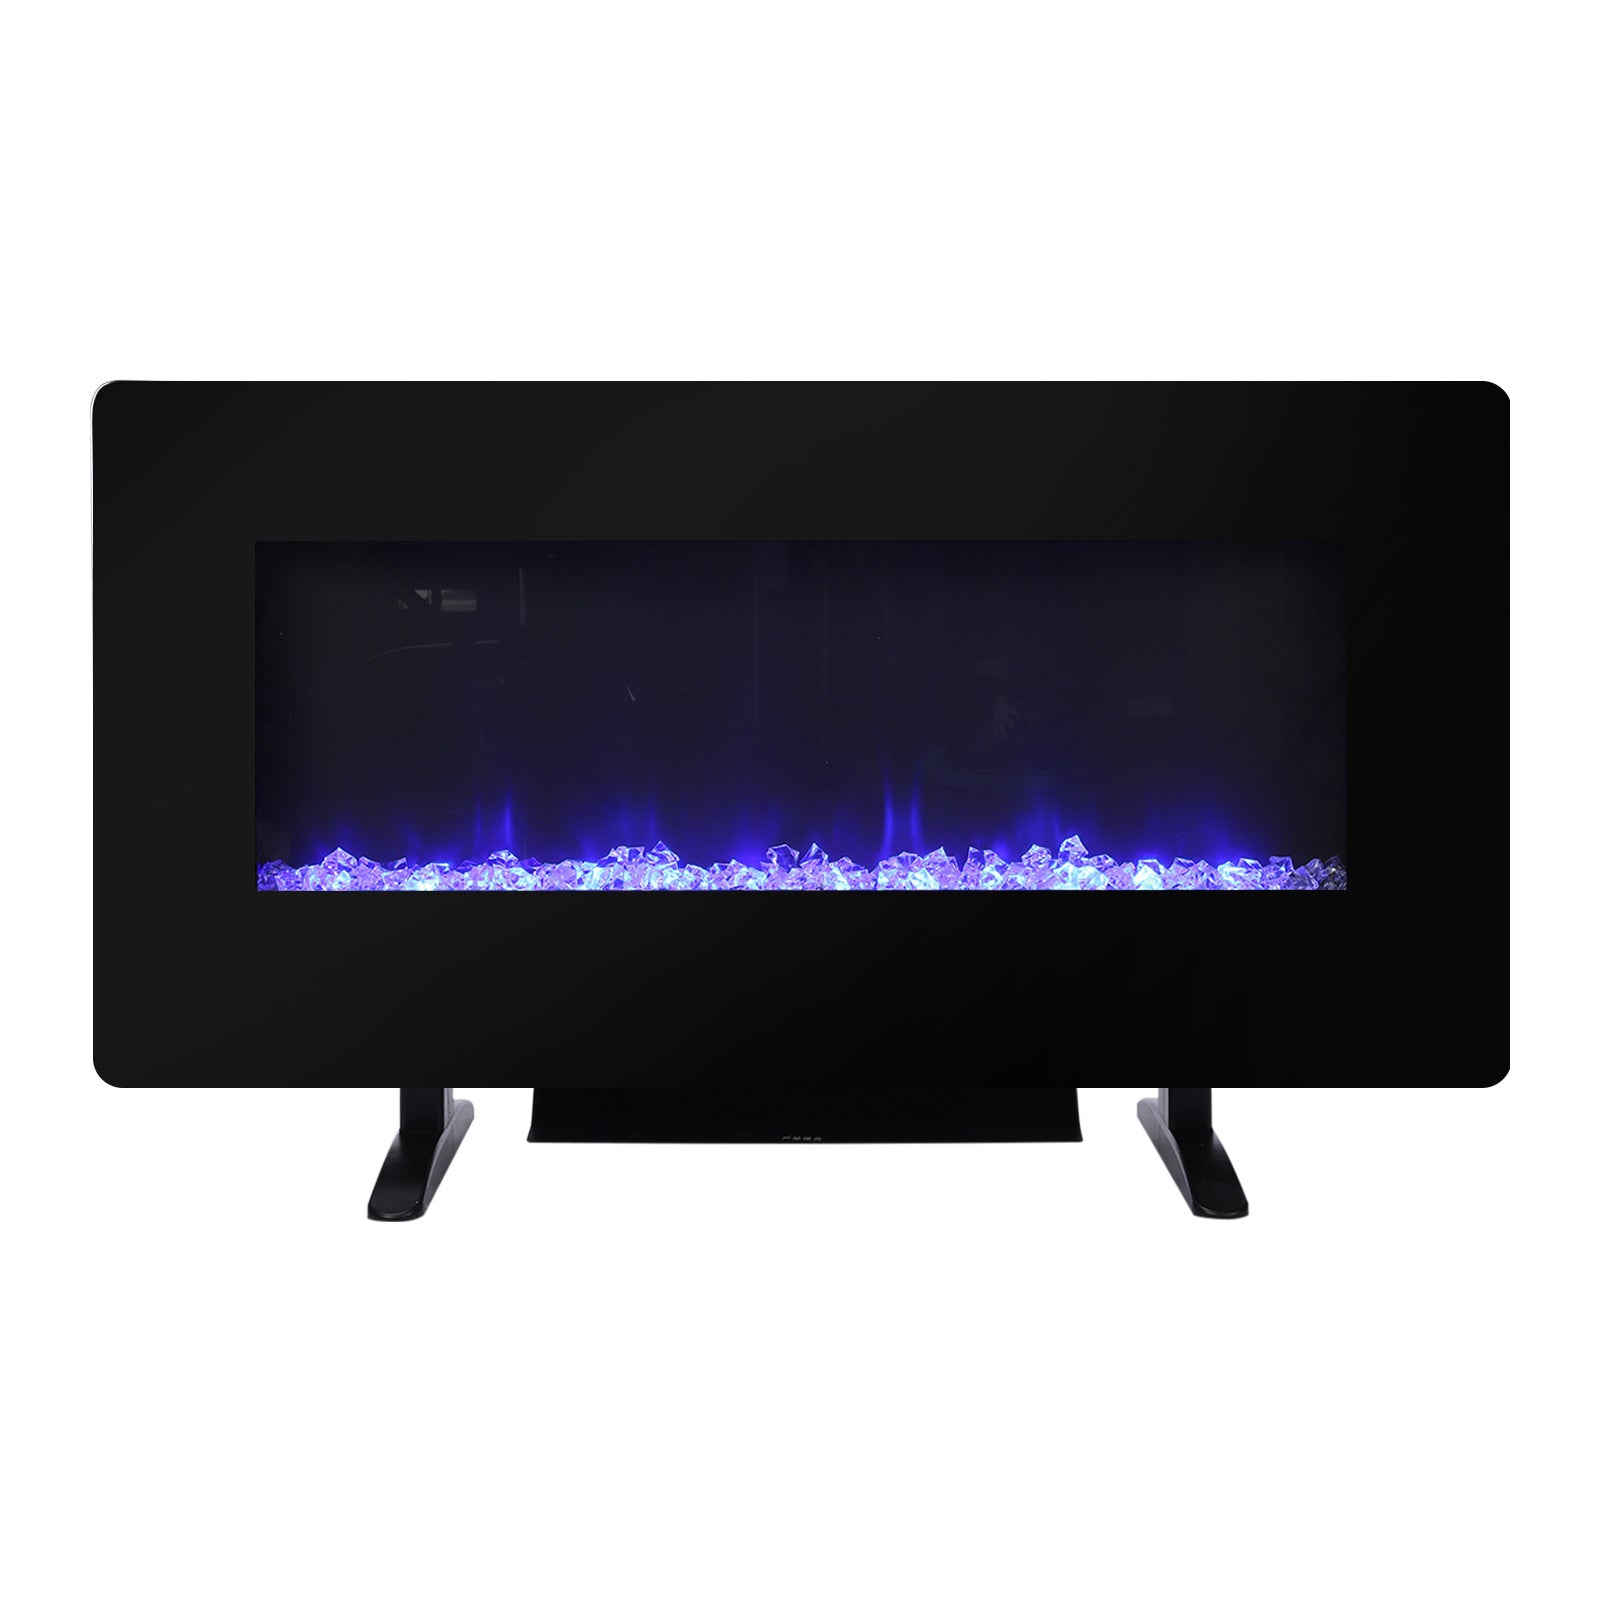 36 Inch Electric Fireplace With Timer,Adjustable Flame Color And Effects